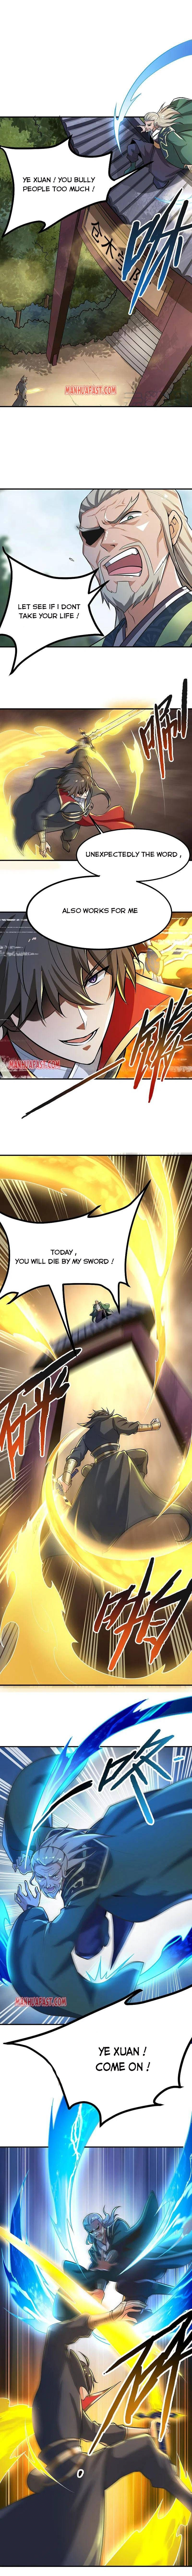 One Sword Reigns Supreme Chapter 144 page 2